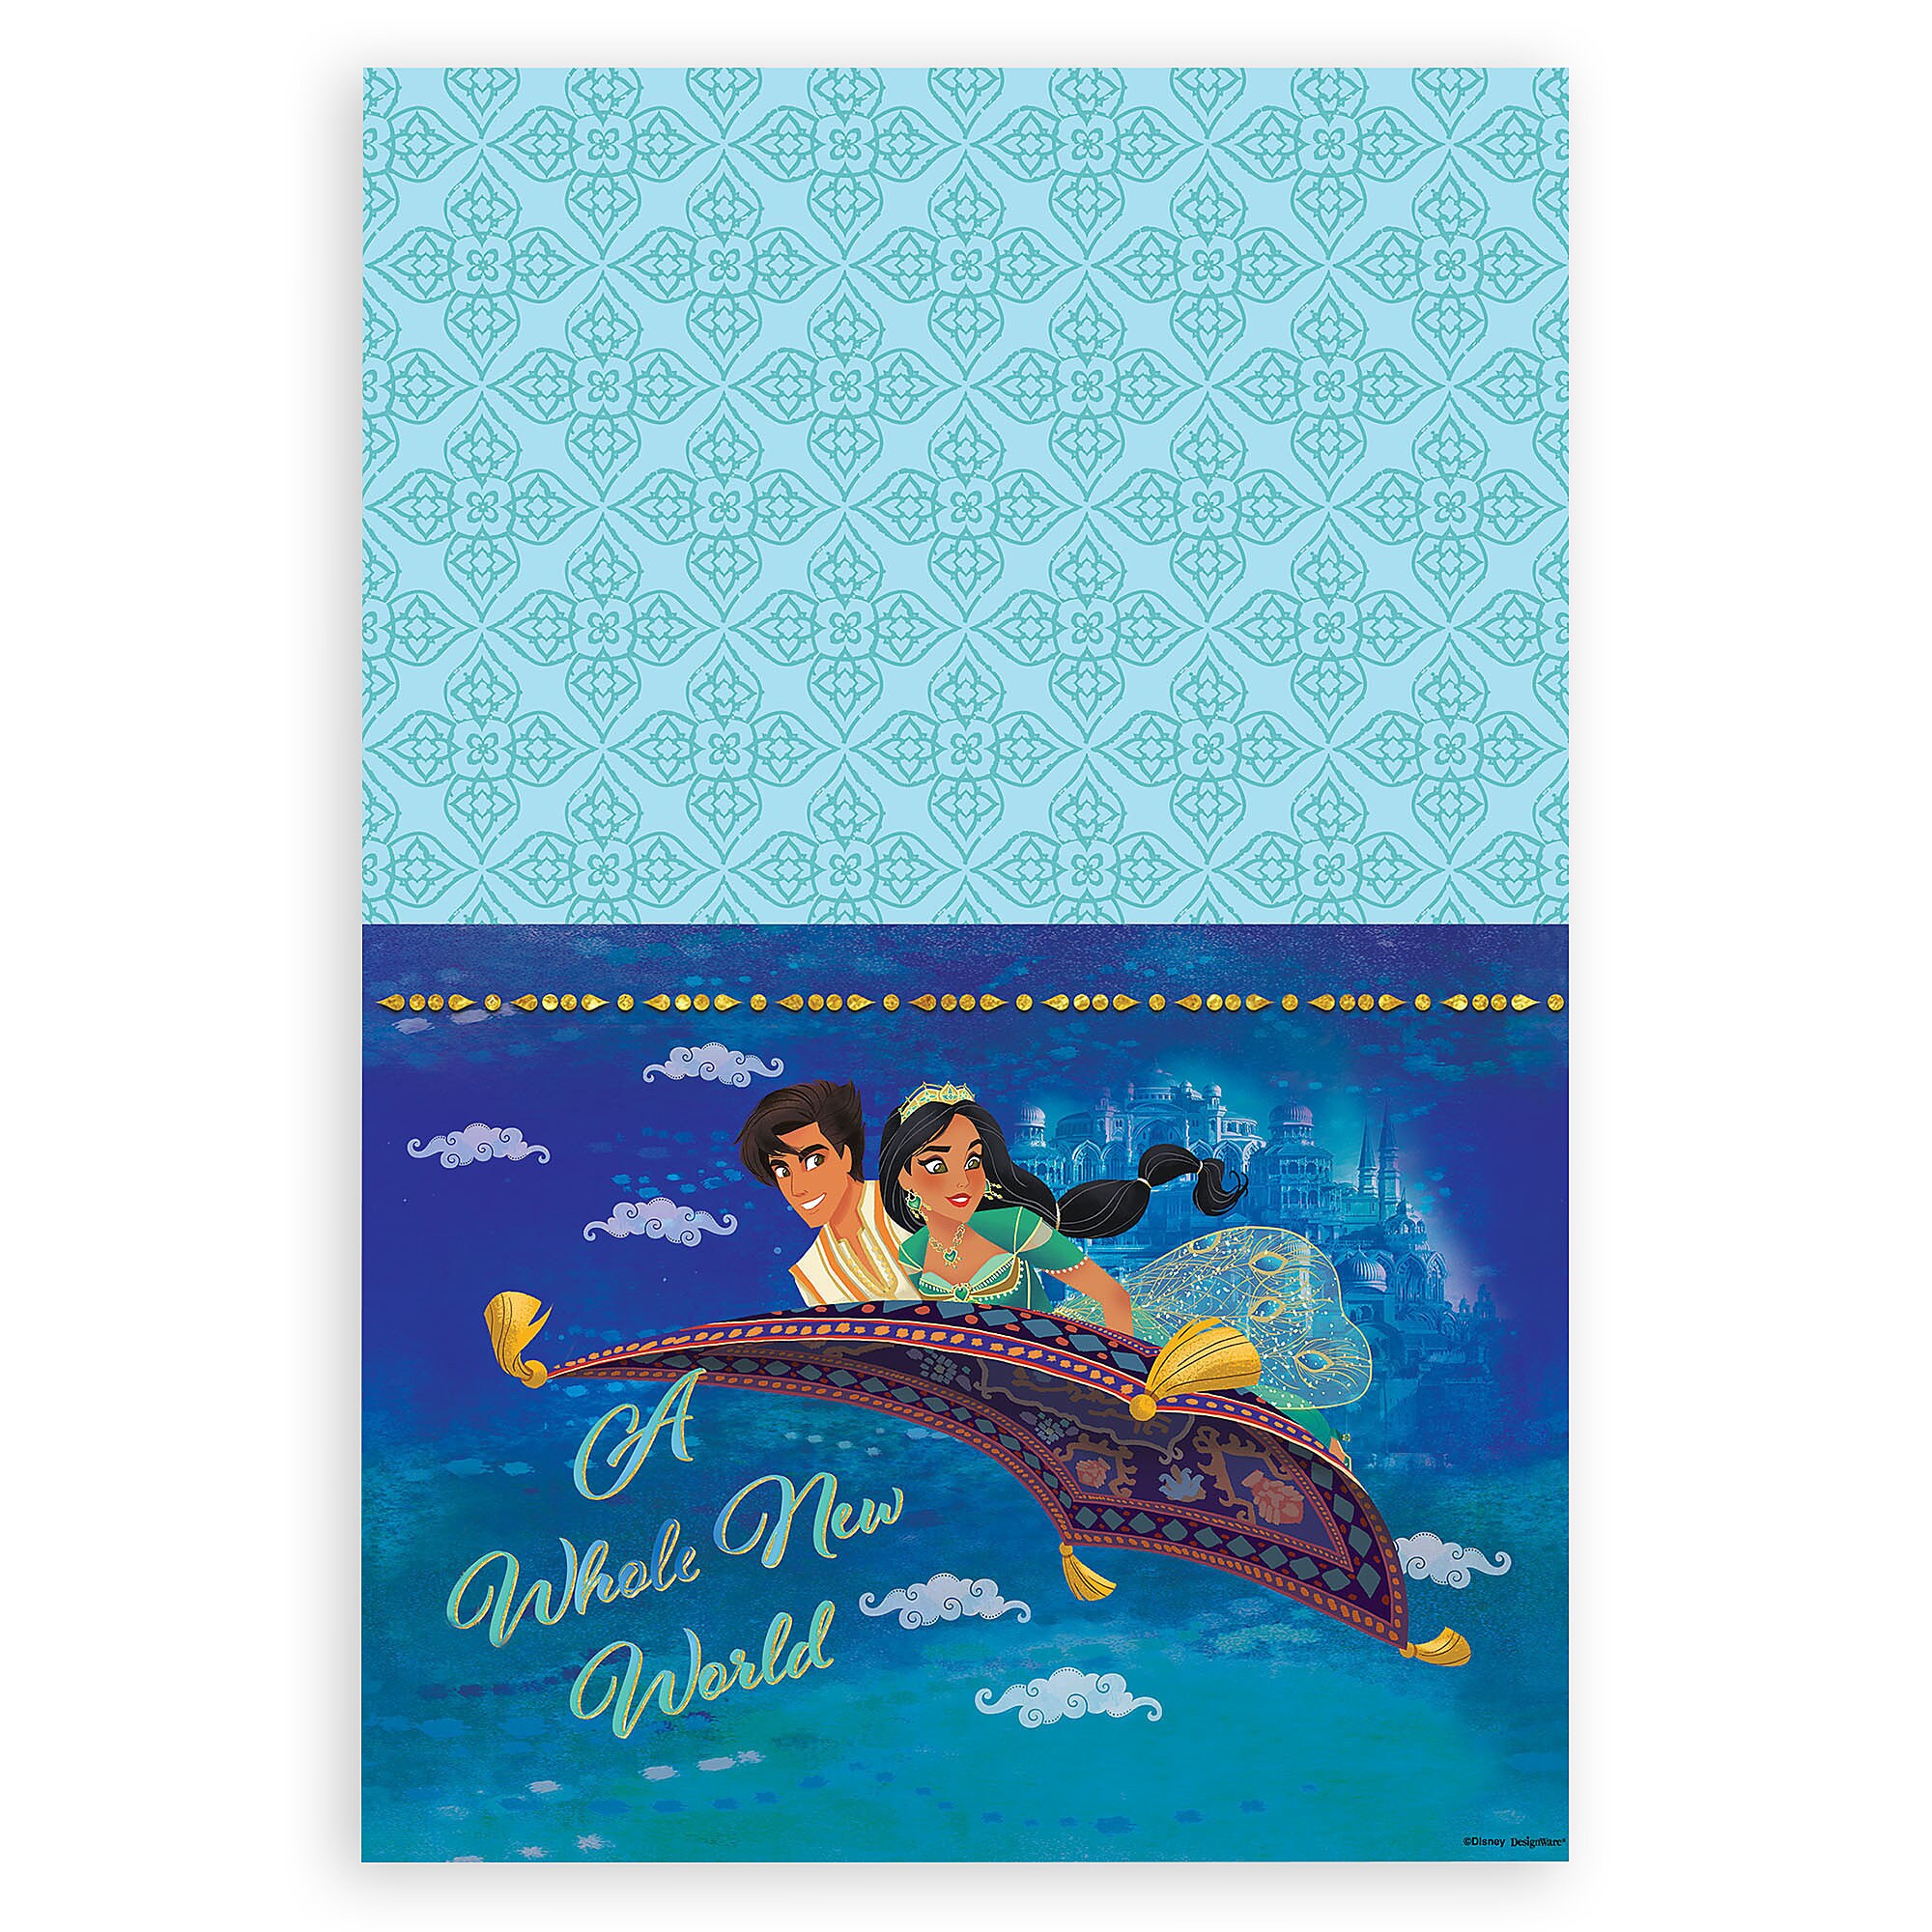 Aladdin Table Cover - Live Action Film